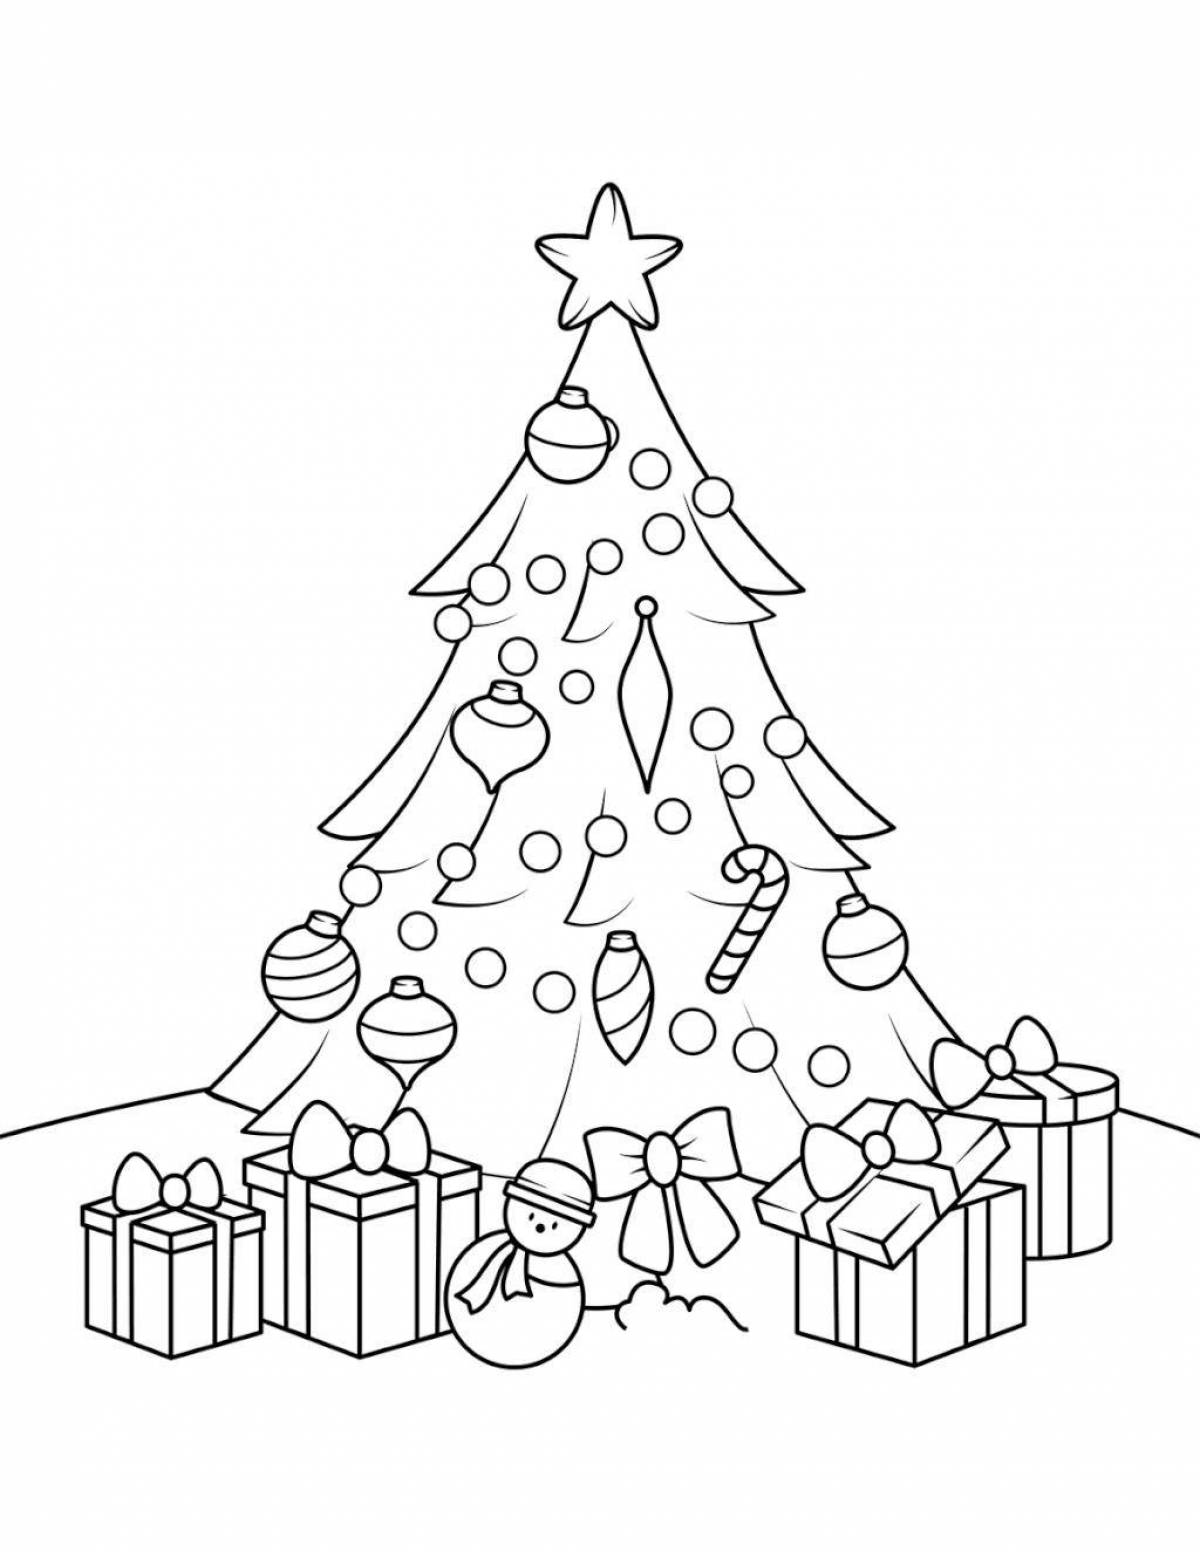 Animated coloring tree with gifts